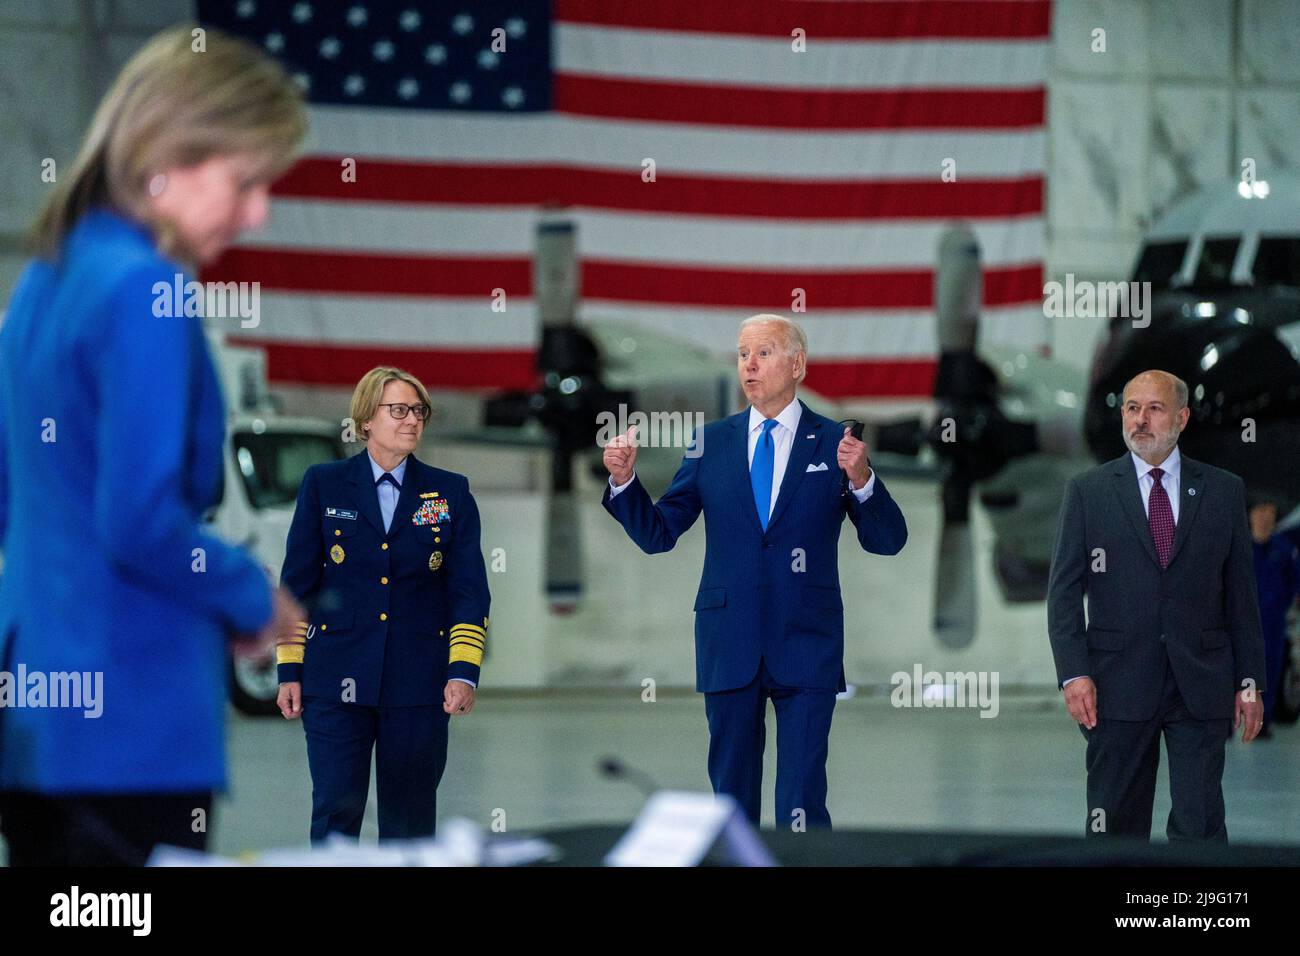 US President Joe Biden walks to a briefing on interagency efforts to prepare for and respond to hurricanes this season at Joint Base Andrews in Maryland, USA 18 May 2022. Credit: Shawn Thew / Pool via CNP Stock Photo